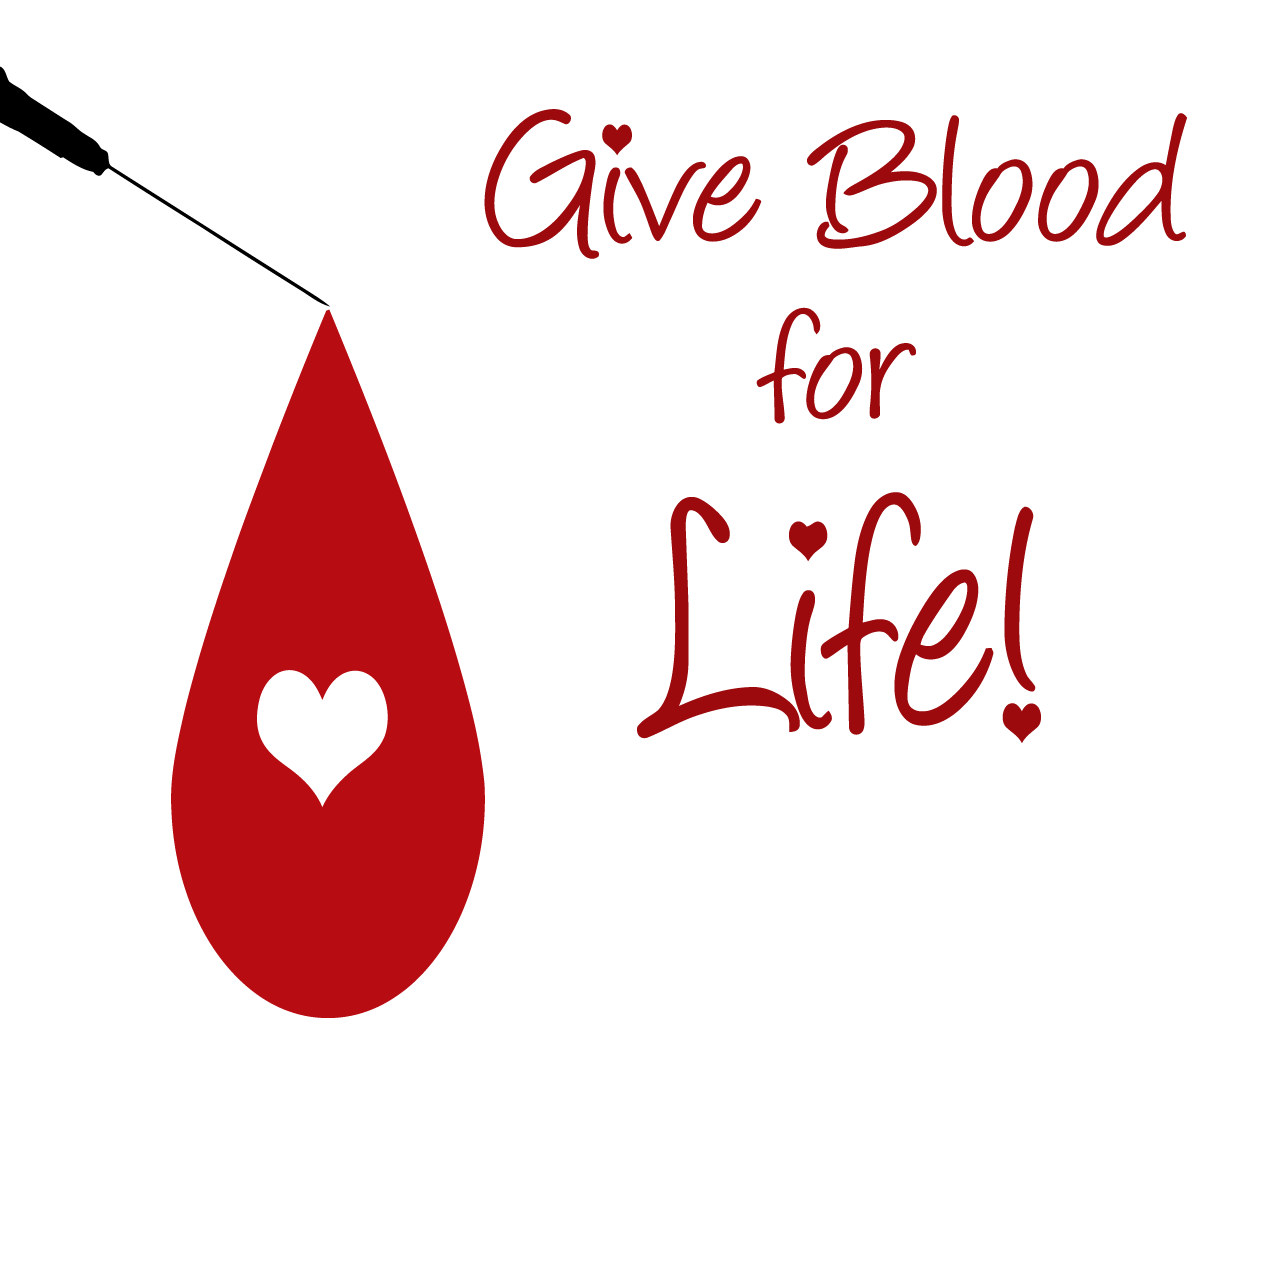 blood bank clipart - photo #23